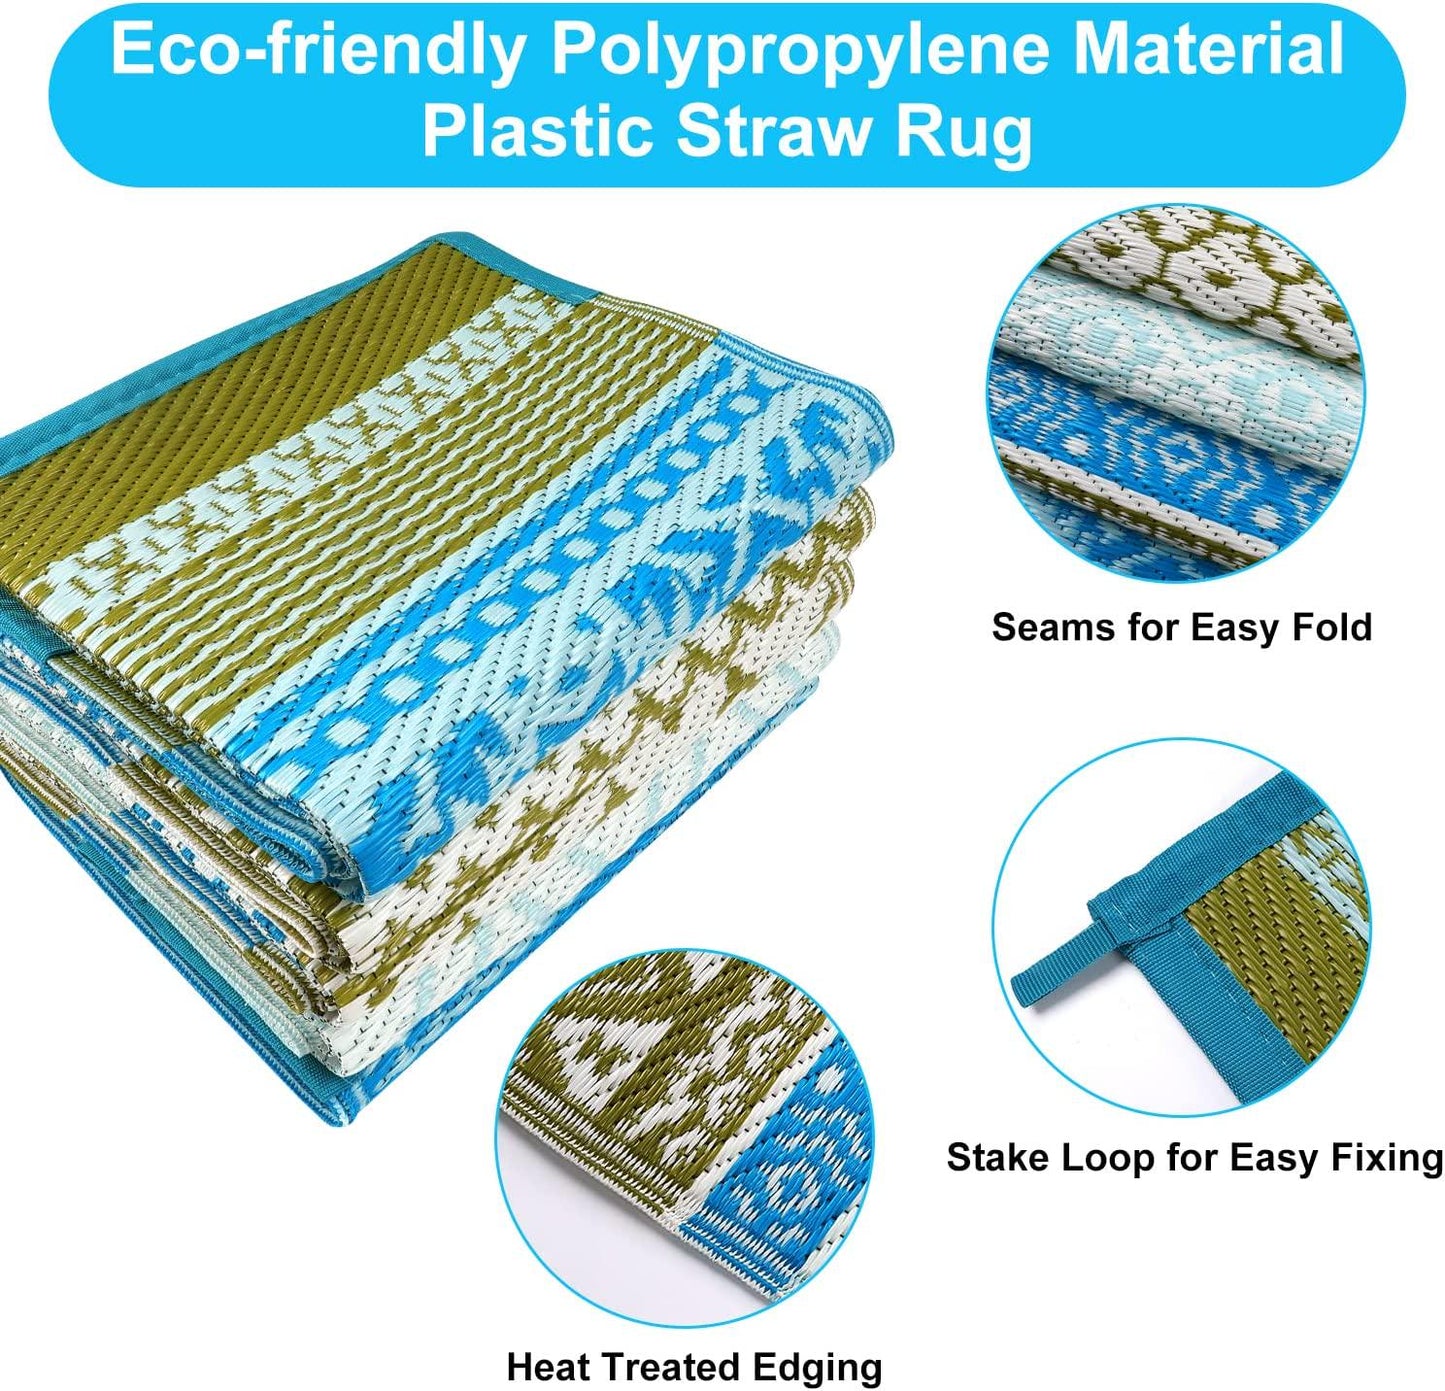 Outdoor Rugs for Patios Clearance Waterproof, 4x6ft Reversible Plastic Straw Outside Area Rugs, Stain and UV Resistant Camping Mat